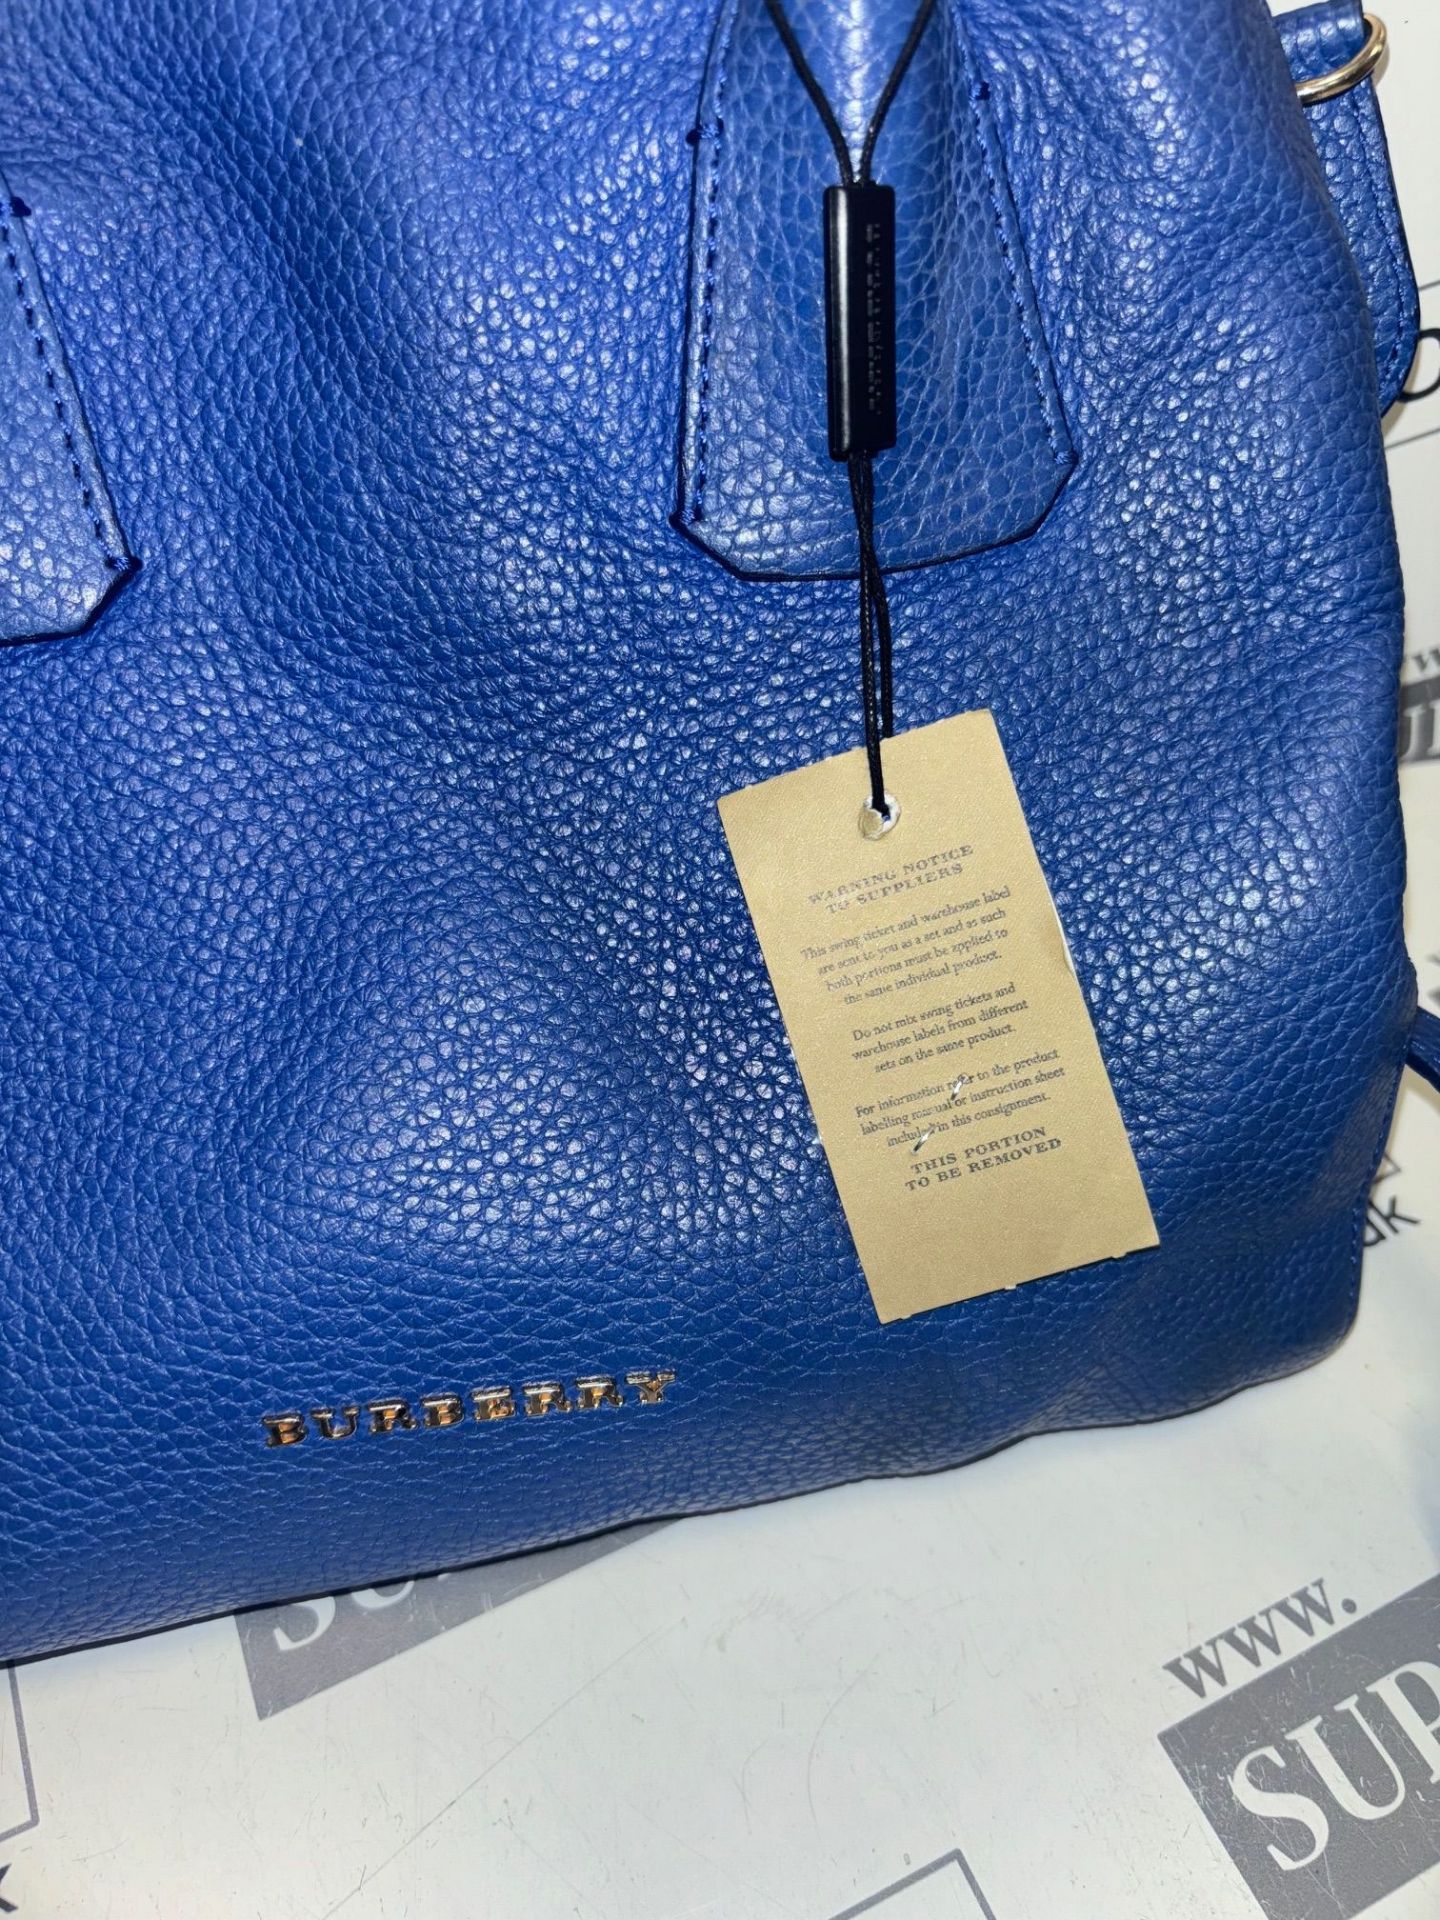 Genuine Burberry Medium Bowling Bag in Blue. RRP £805. This shoulder bag has room for all of your - Image 4 of 9